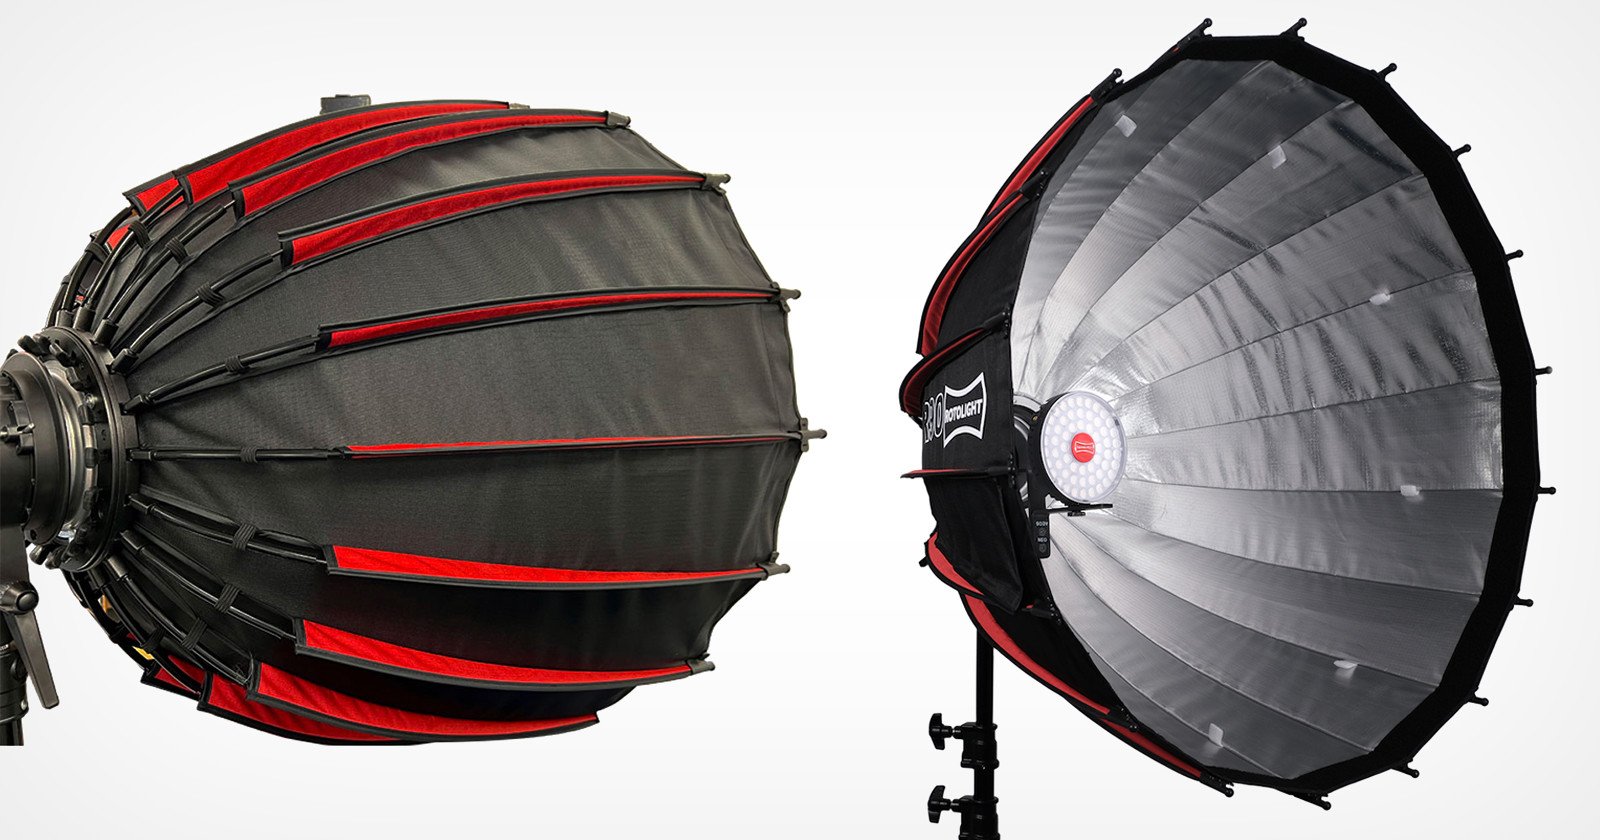  rotolight parabolic softboxes are bit confusing 